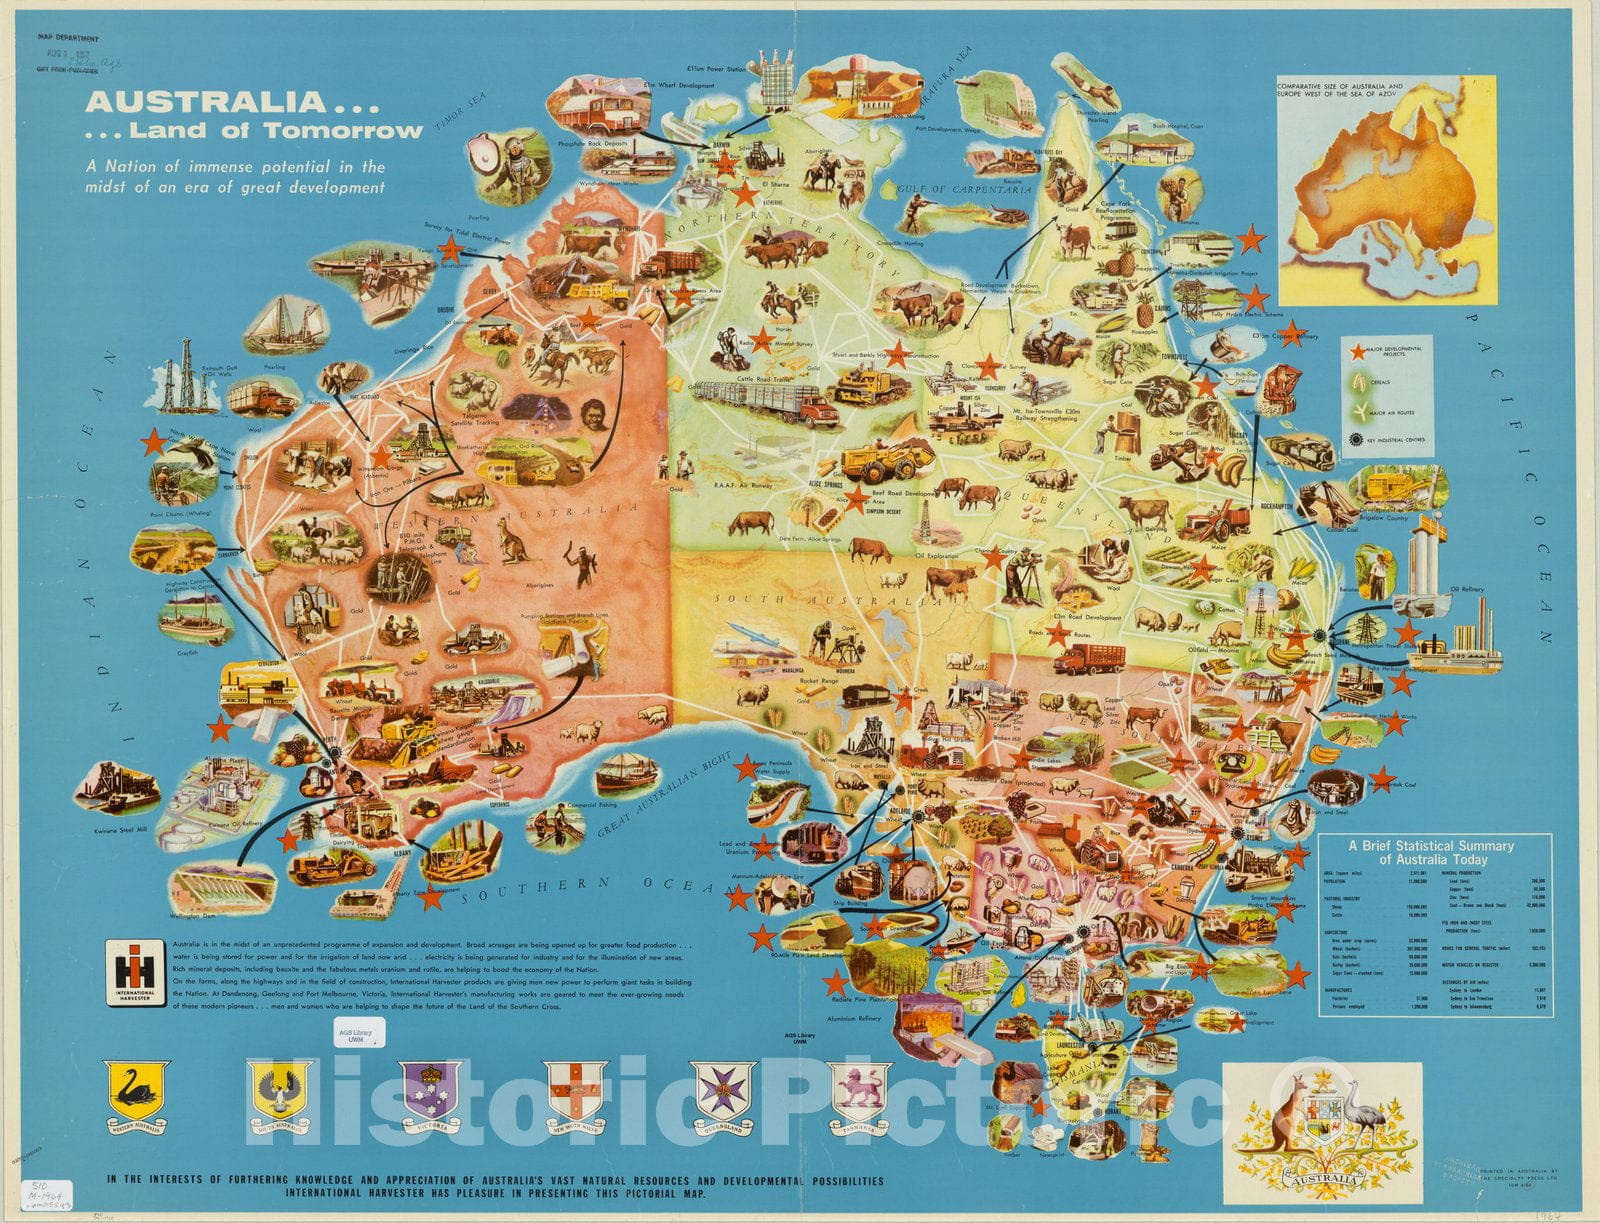 Map : Australia 1964, Australia - land of tomorrow : a nation of immense potential in the midst of an era of great development , Antique Vintage Reproduction